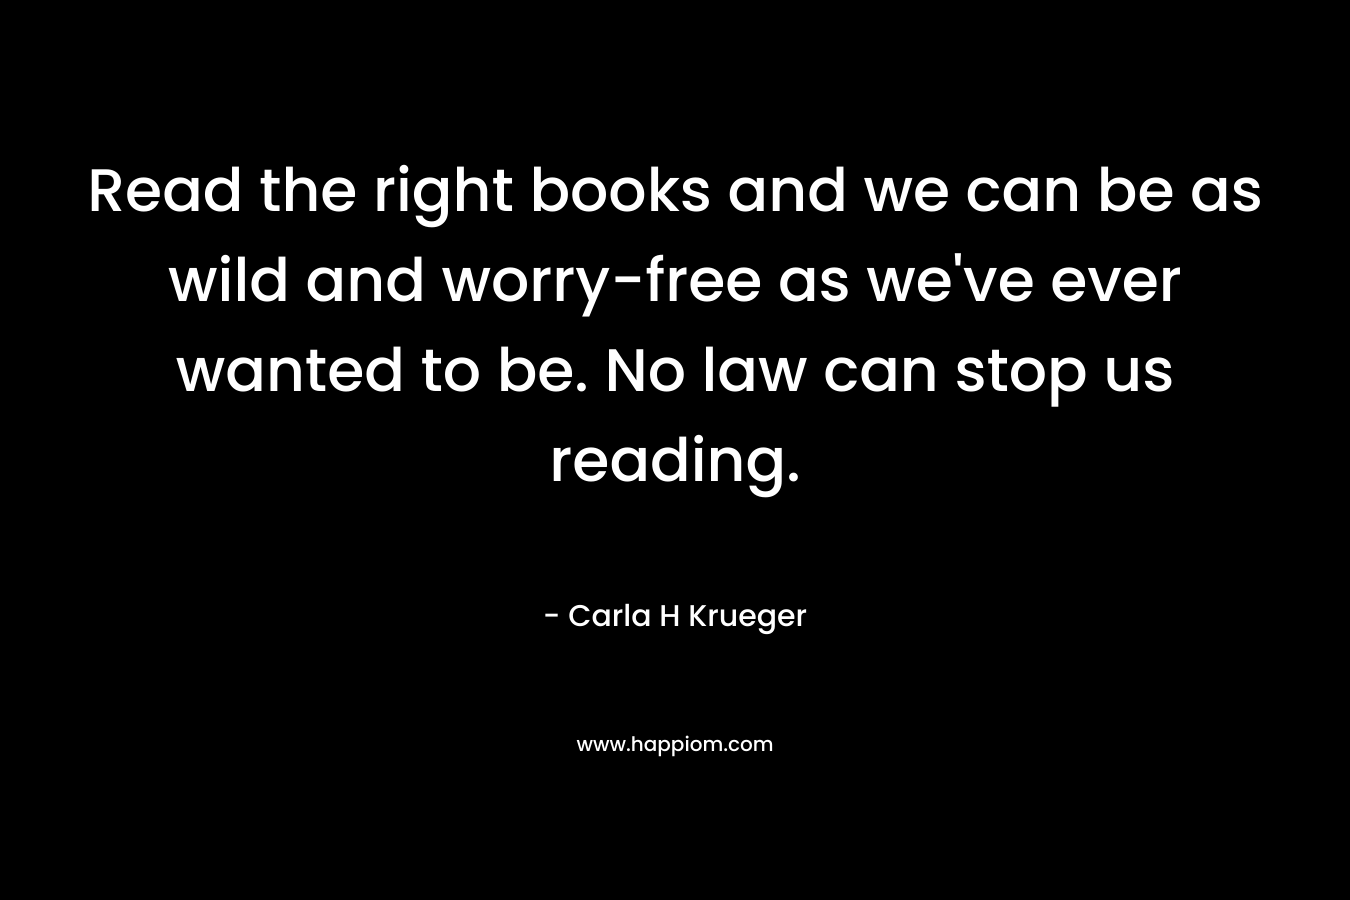 Read the right books and we can be as wild and worry-free as we've ever wanted to be. No law can stop us reading.